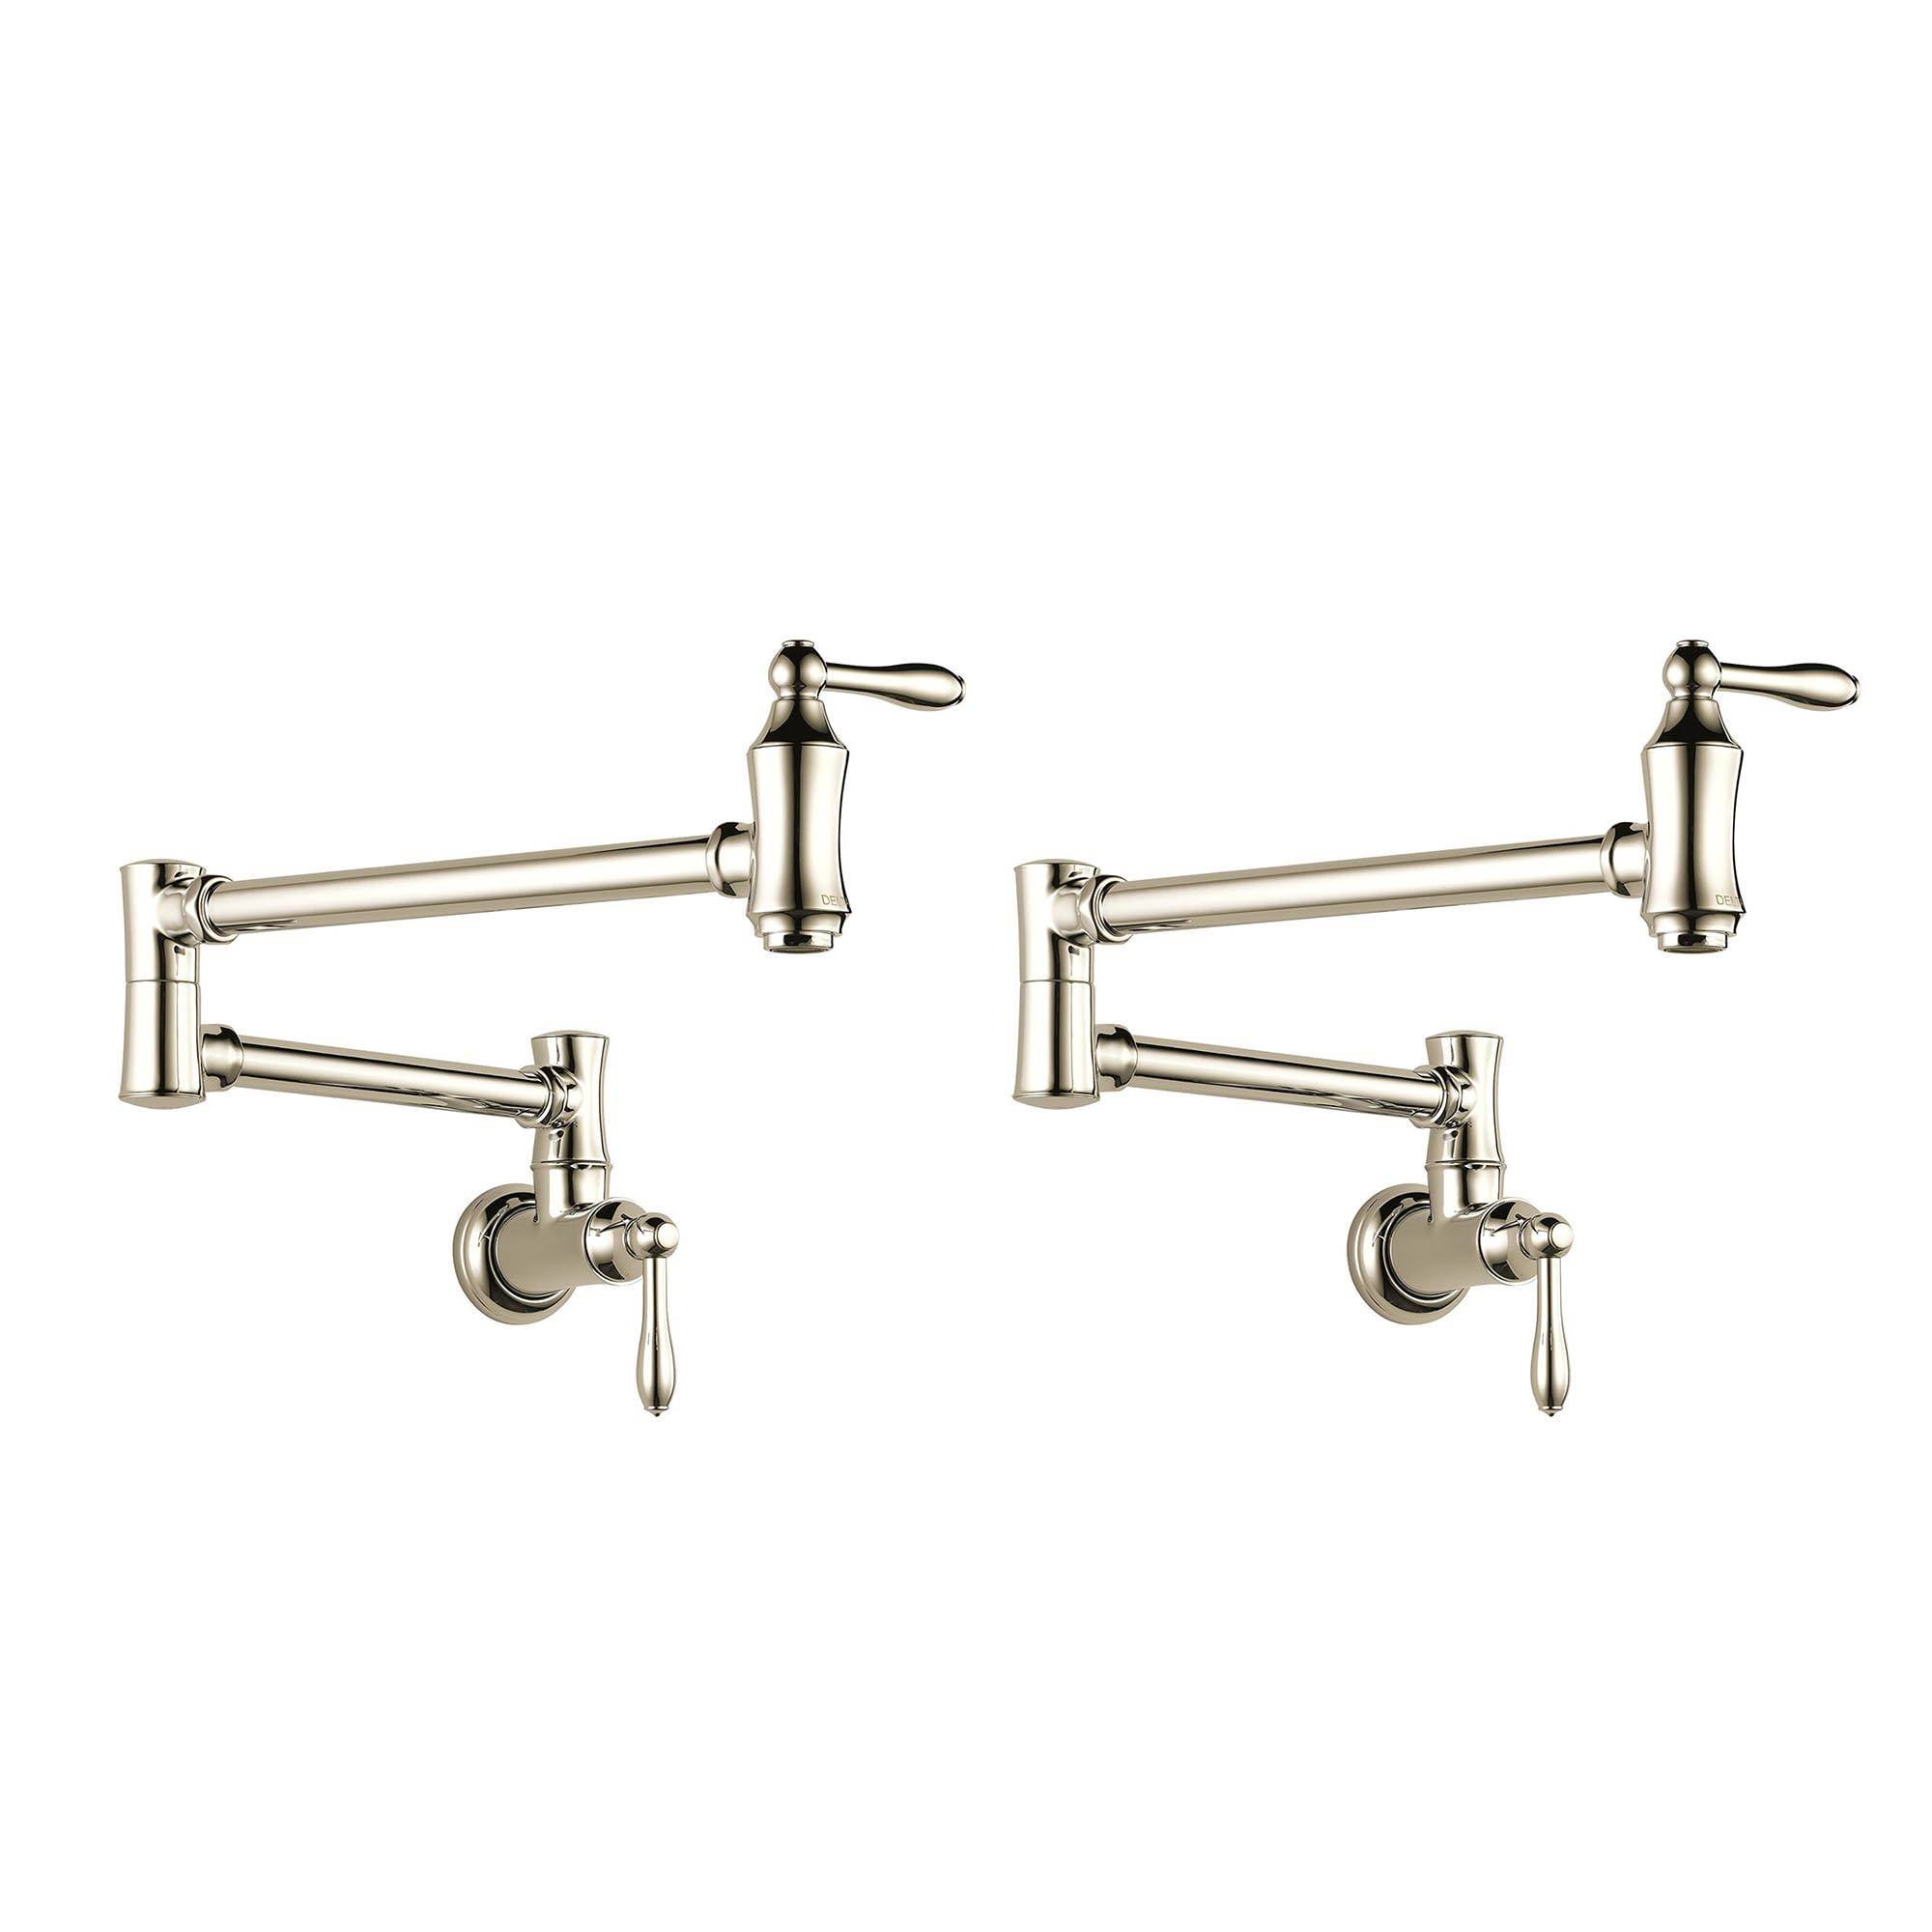 2 Pack Polished Nickel Delta Faucets Victorian Home Pot Filler Wall Faucet 